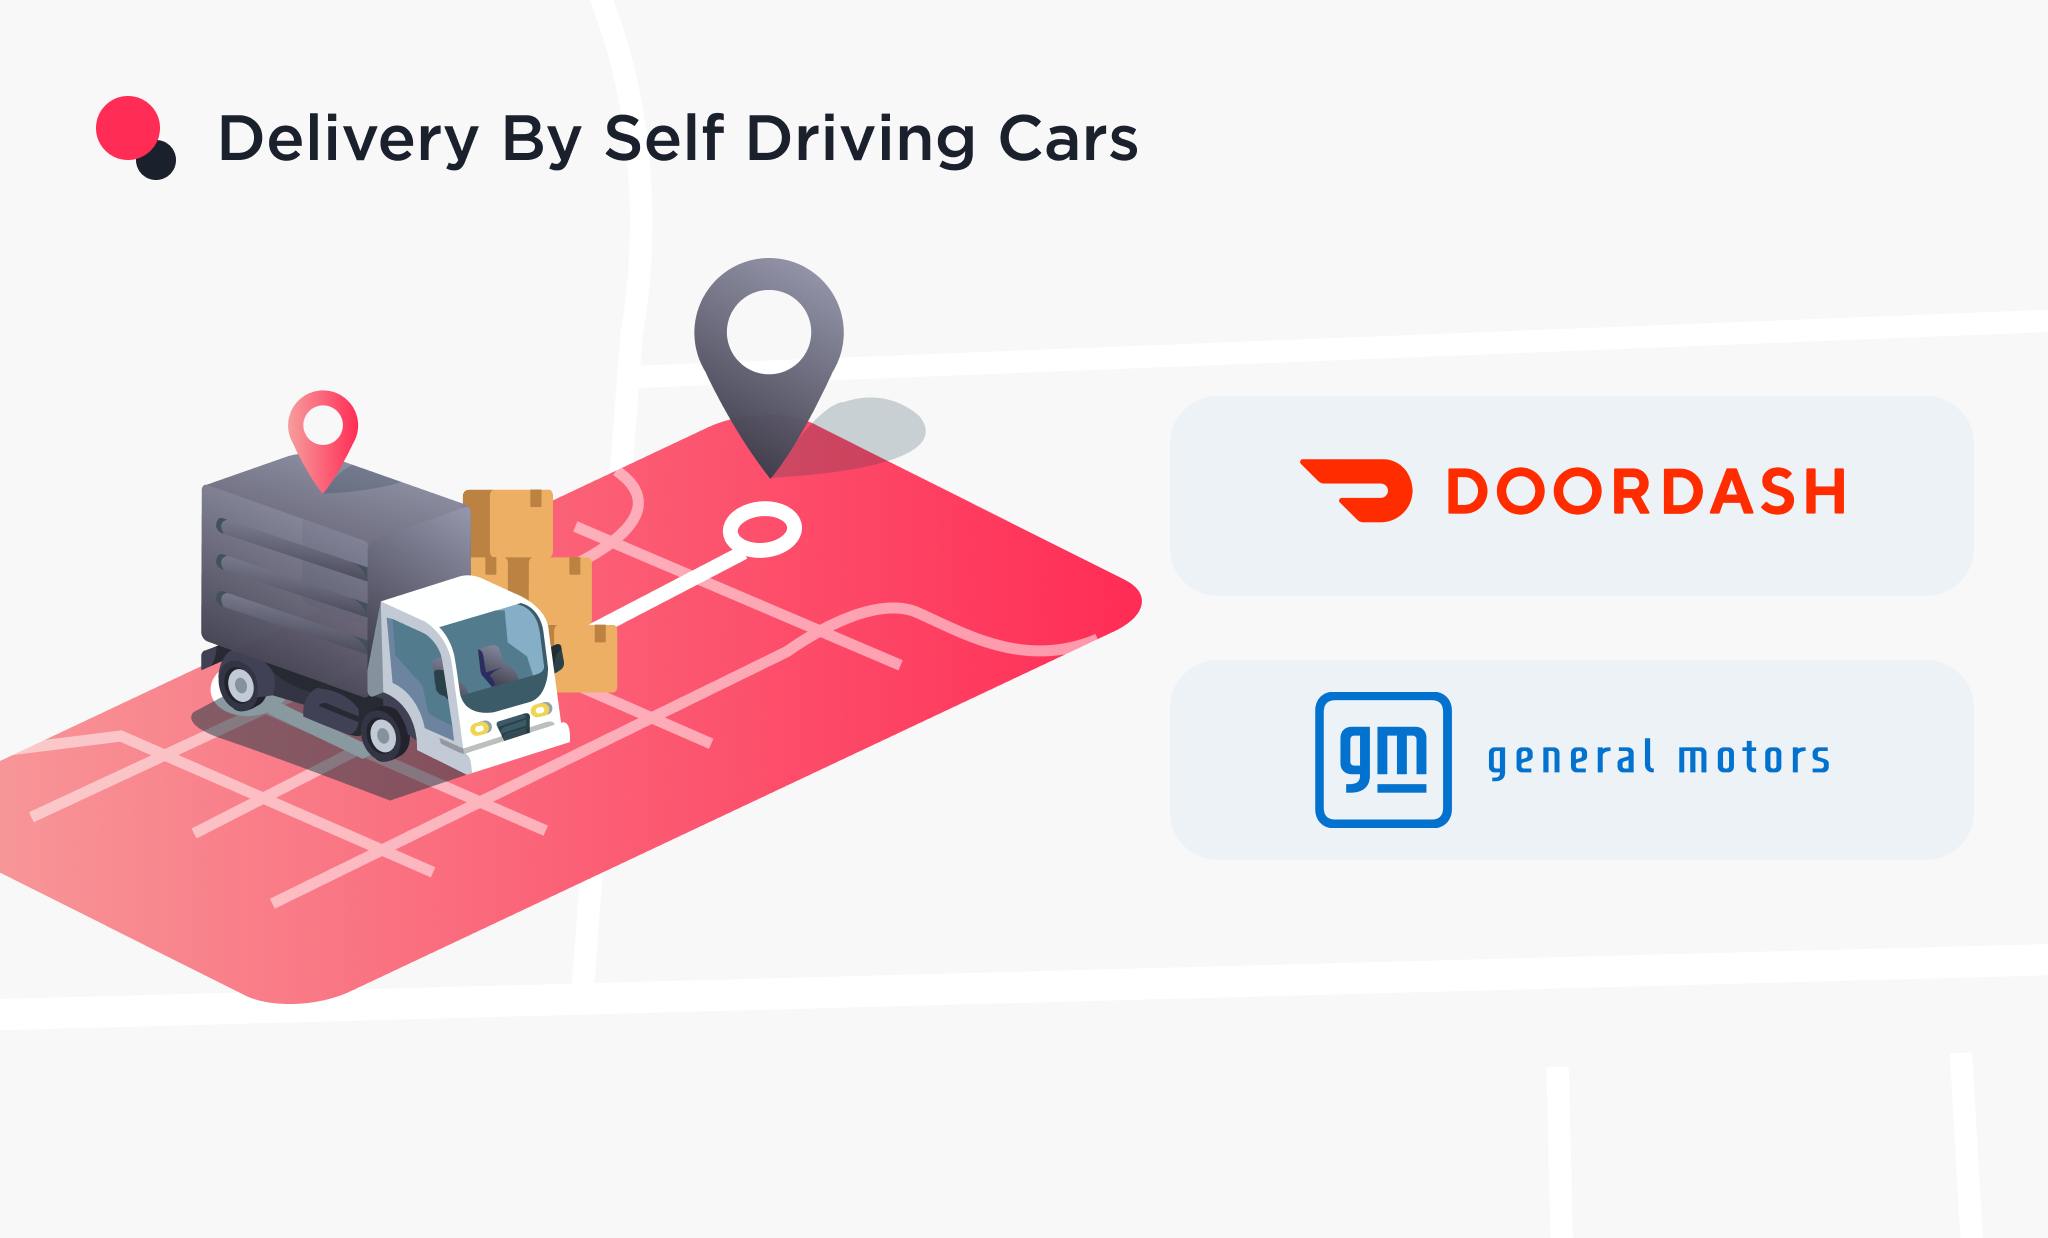 the image shows the food delivery by self driving cars